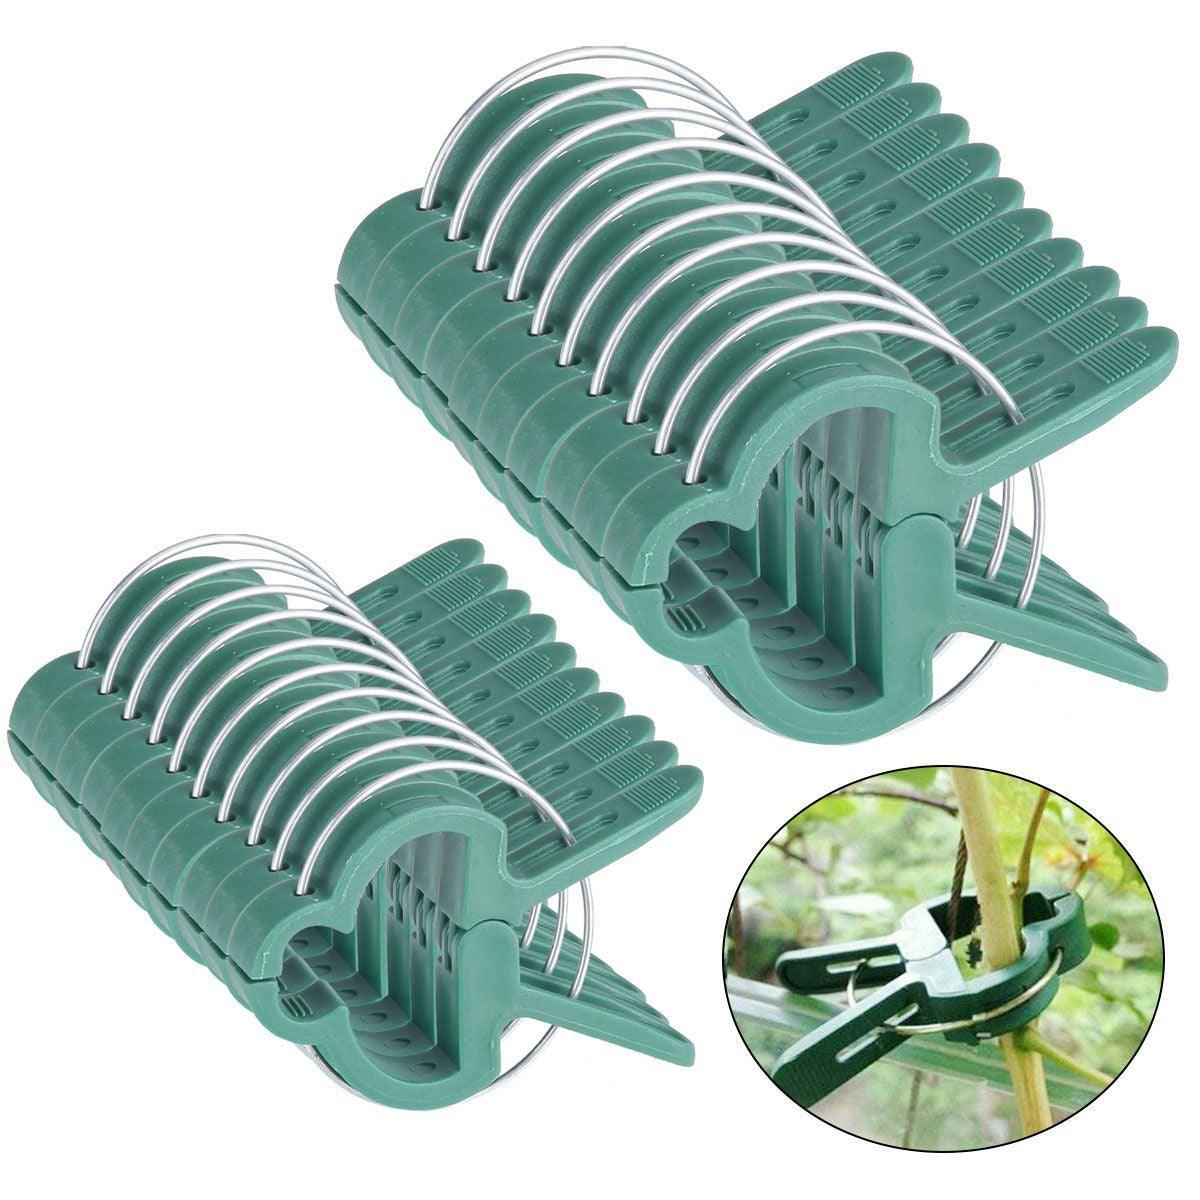 Reusable Large Plant & Garden Clips Support Tomato Vegetable Trellis Twine Ties